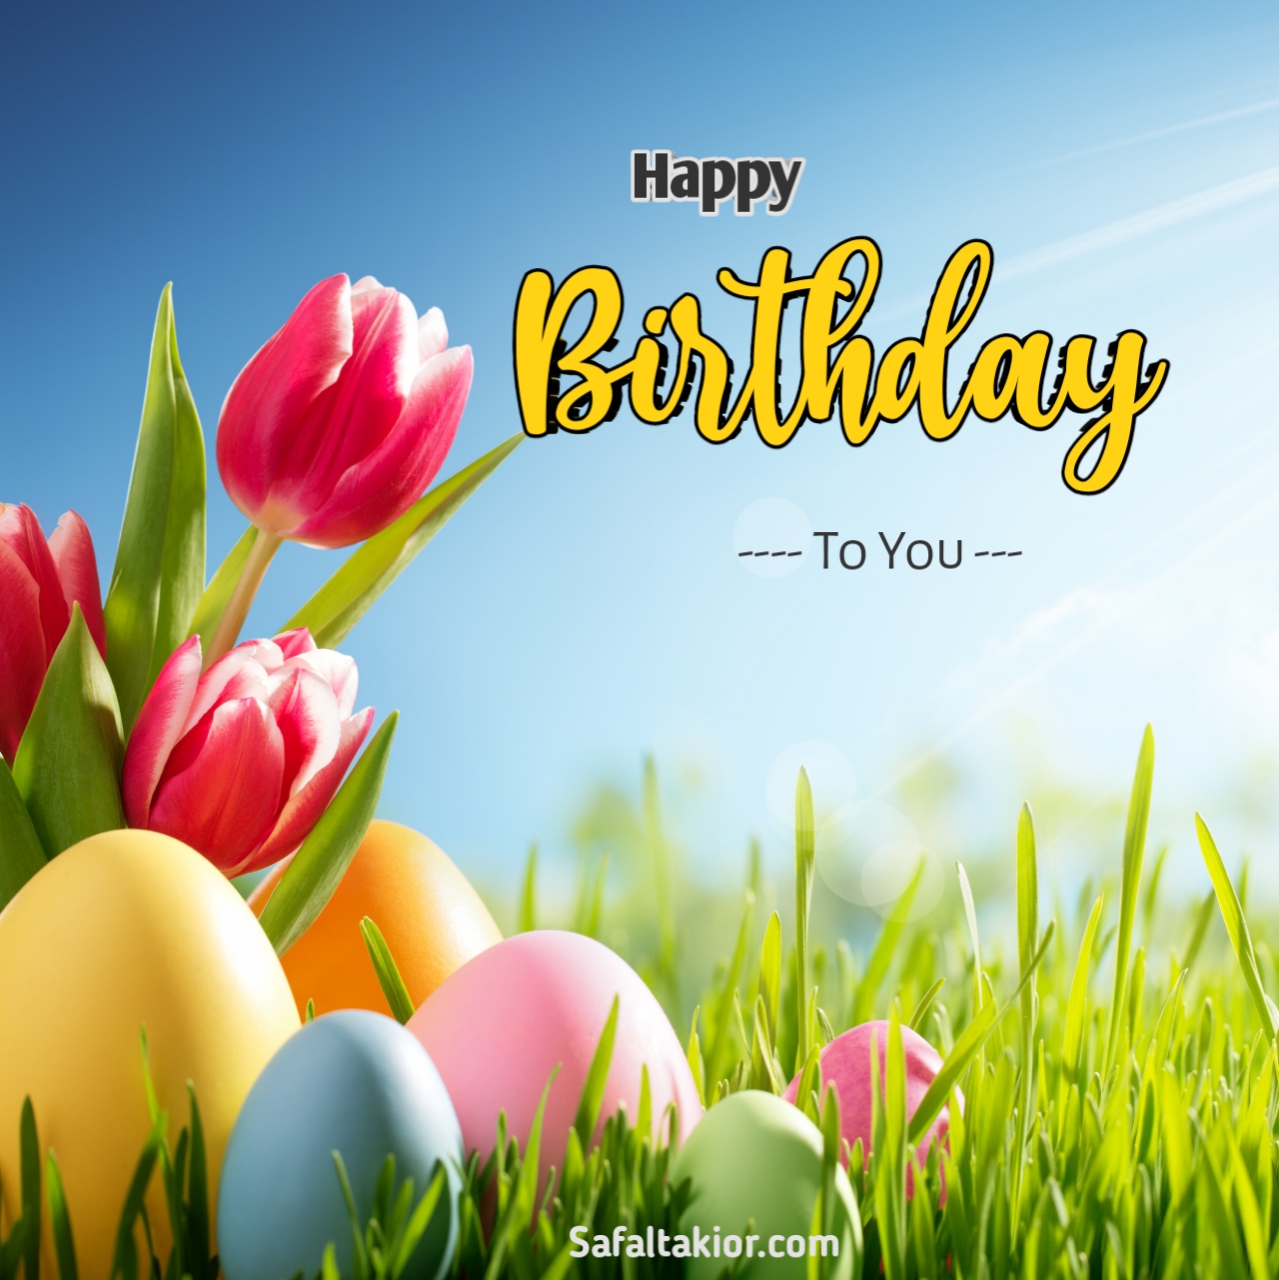 happy birthday wishes images with bible verses gif